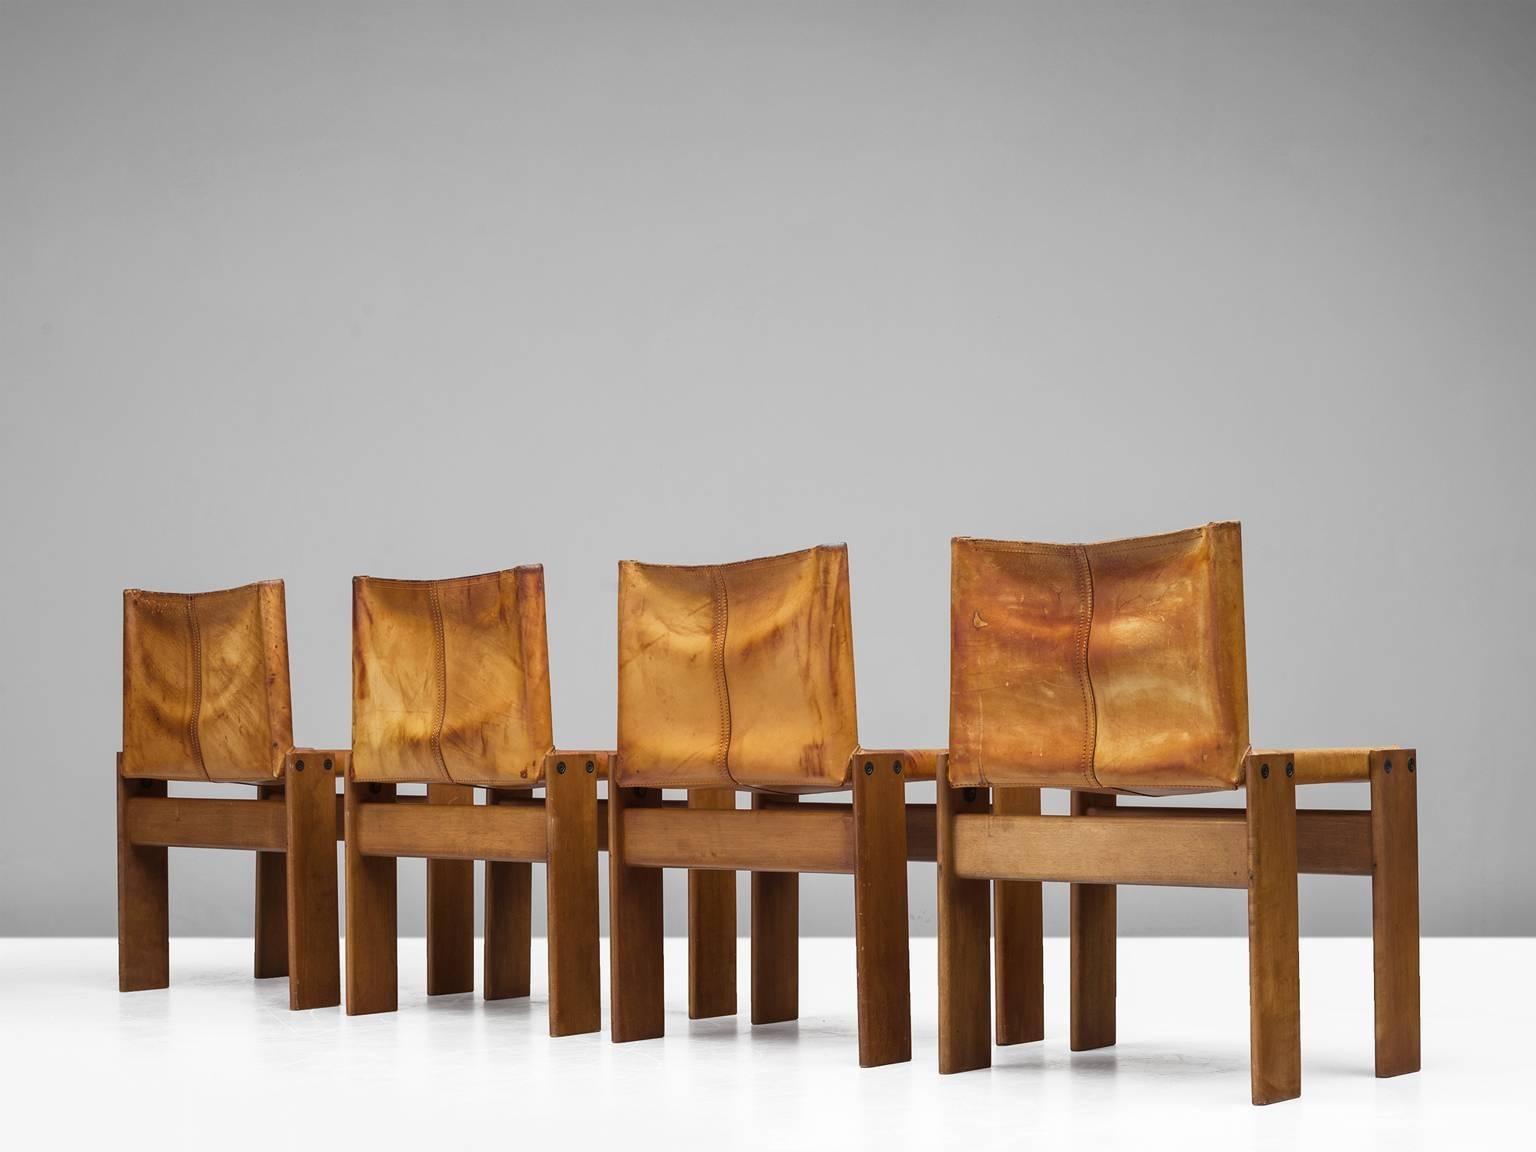 Dining chairs by Arfa & Tobia Scarpa, walnut and cognac leather, Italy, 1974.

These four chairs are strong and sturdy in their design. The wonderfully warm patinated leather is very wel suited to the dark, aged oak. Interesting is the 'flat'